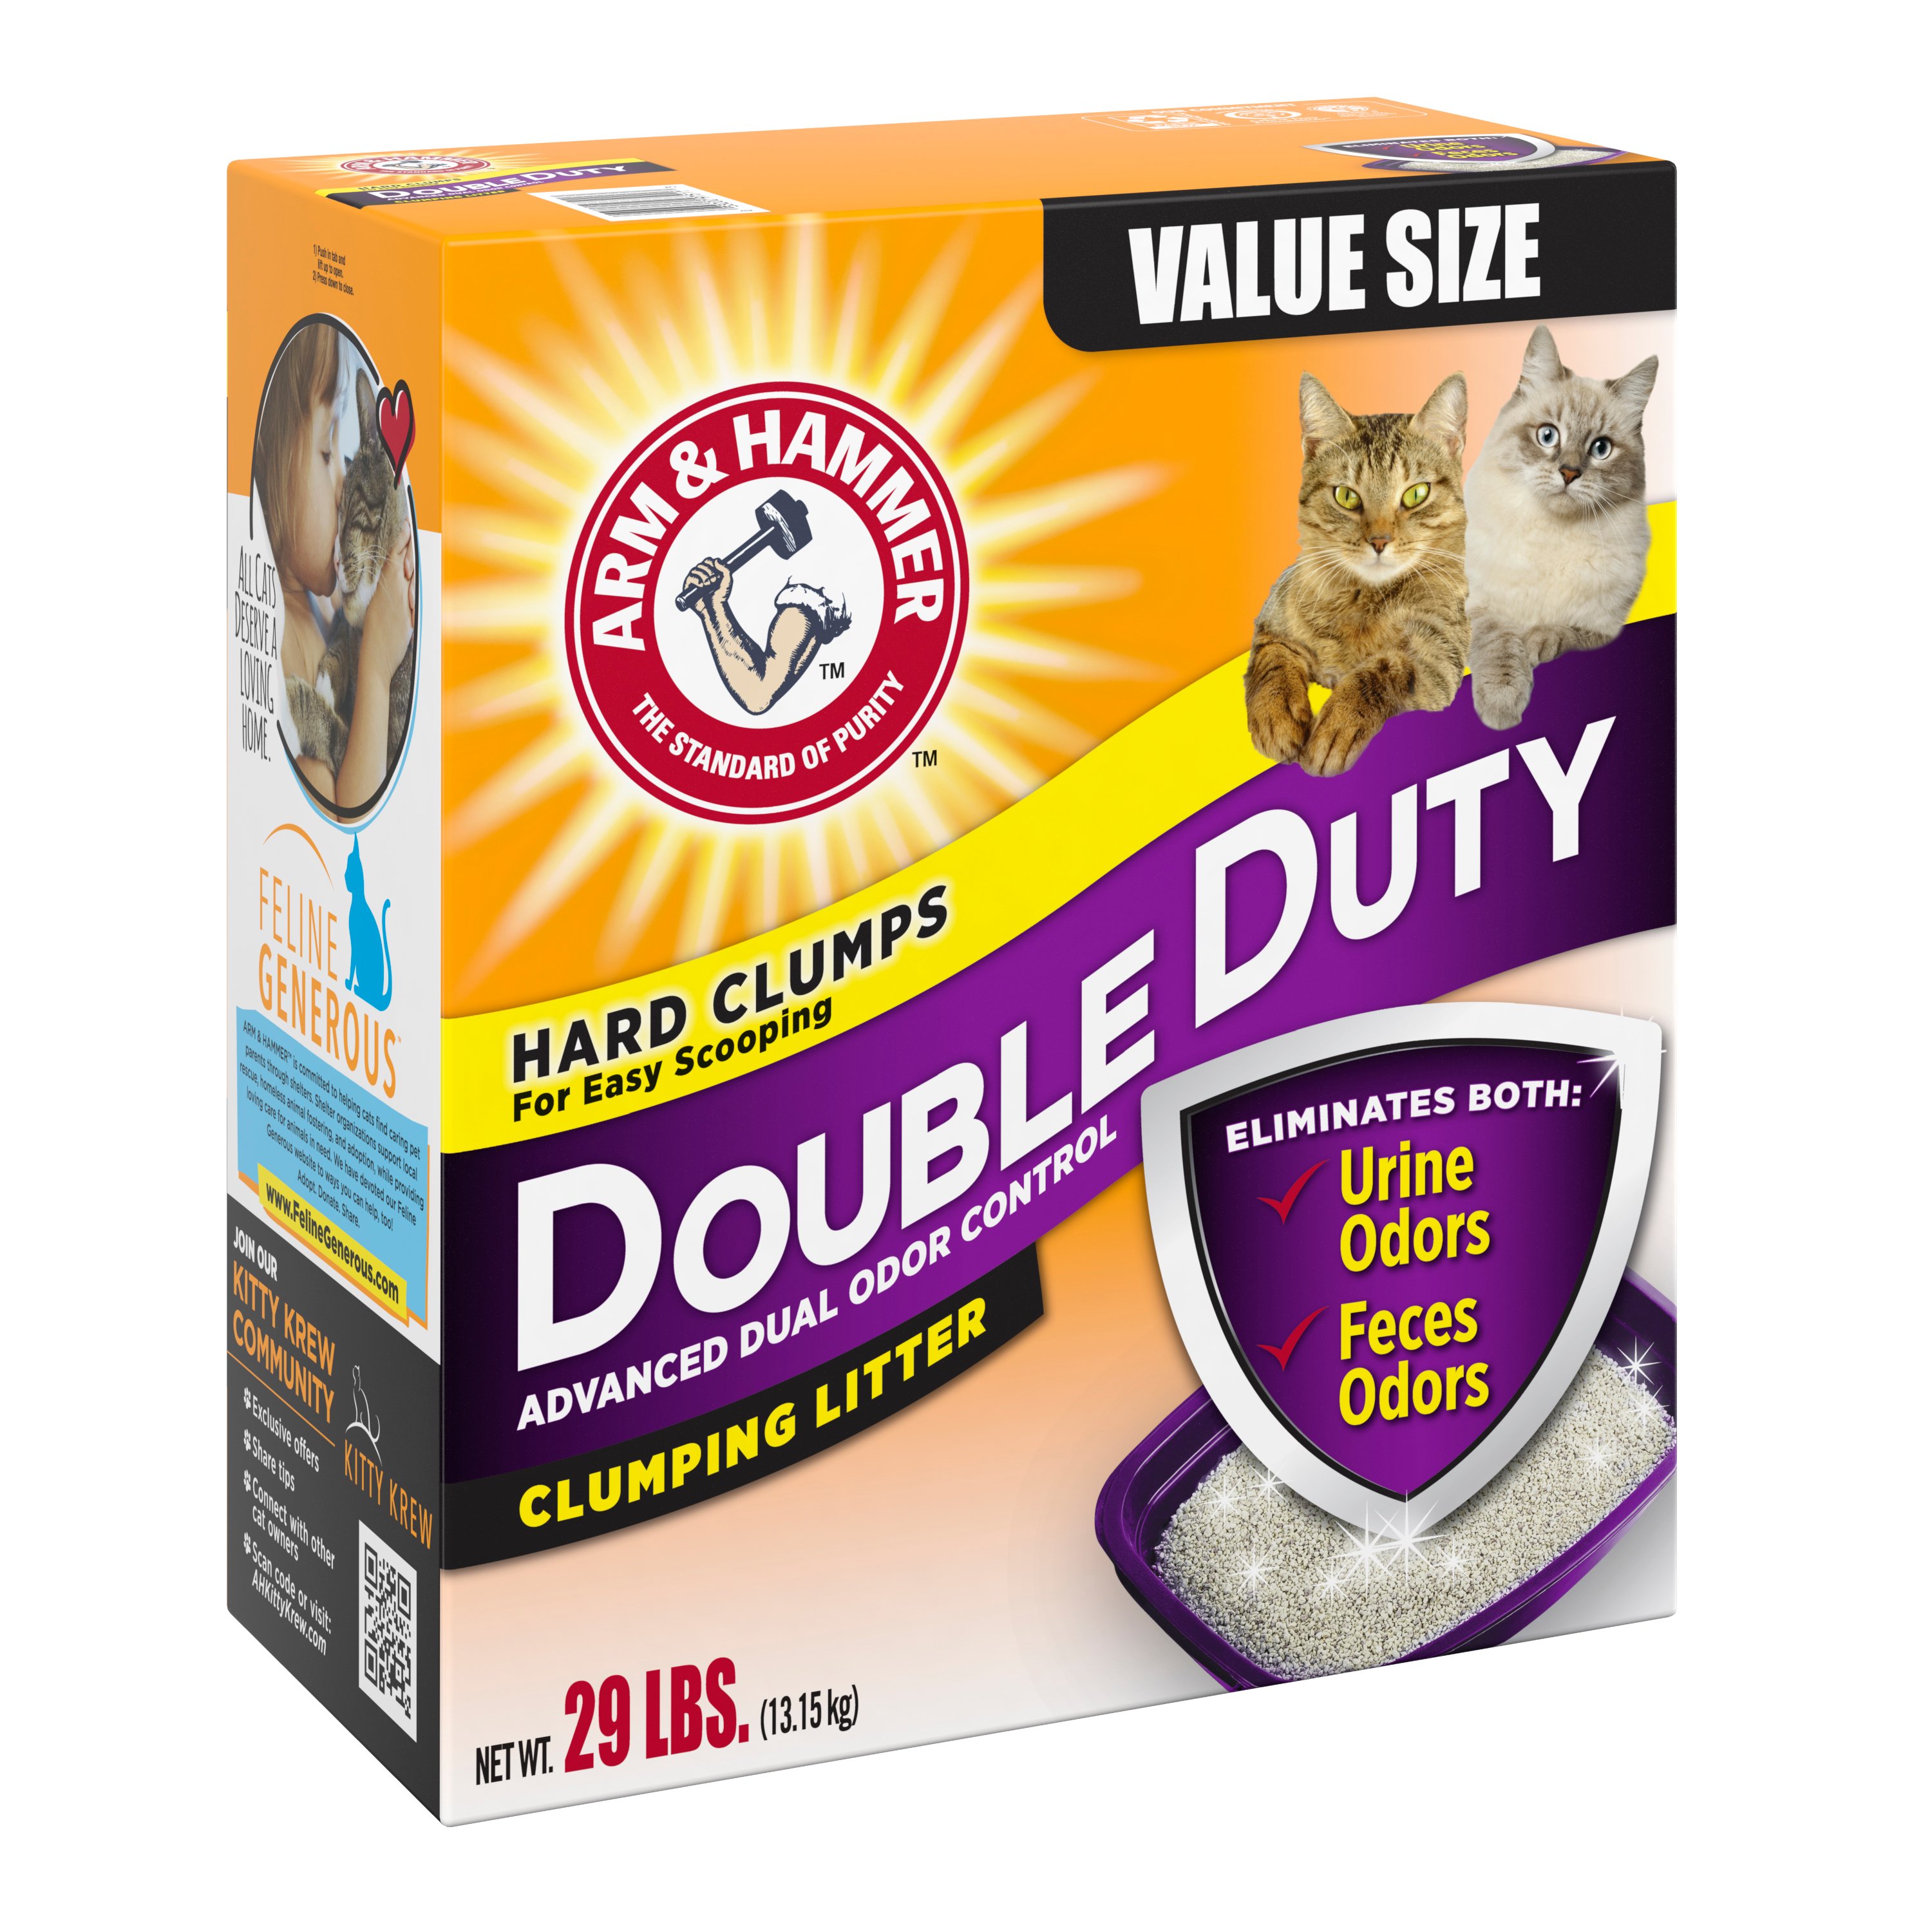 Arm & Hammer Double Duty Cat Litter Value Size Shop Cats at HEB